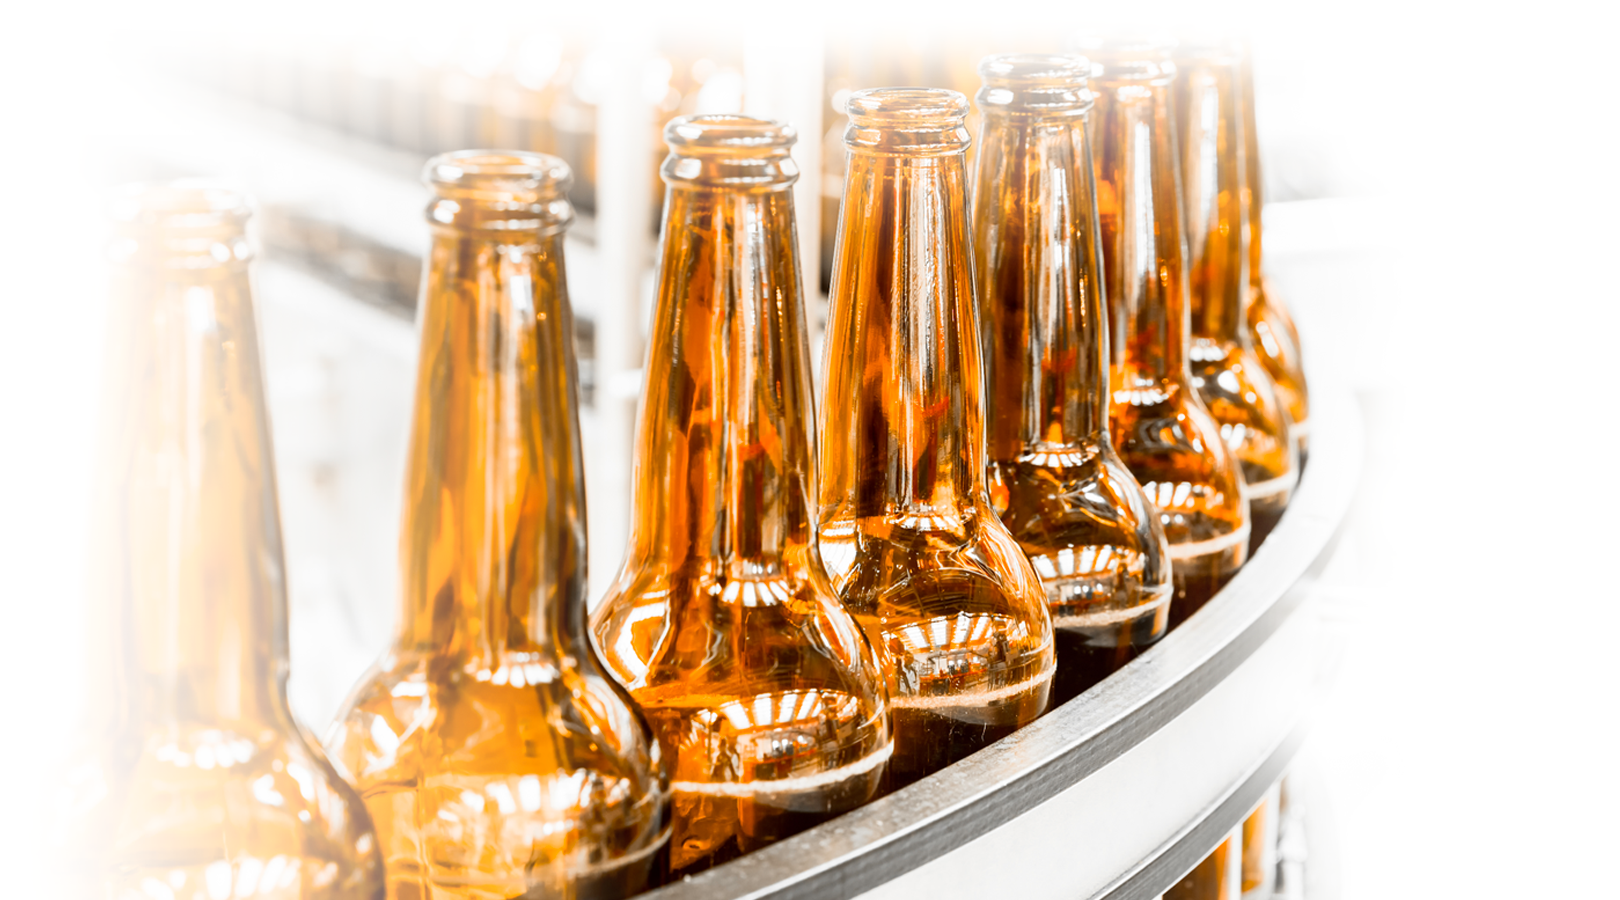 Bottling line with glass beer bottles that have scuff marks